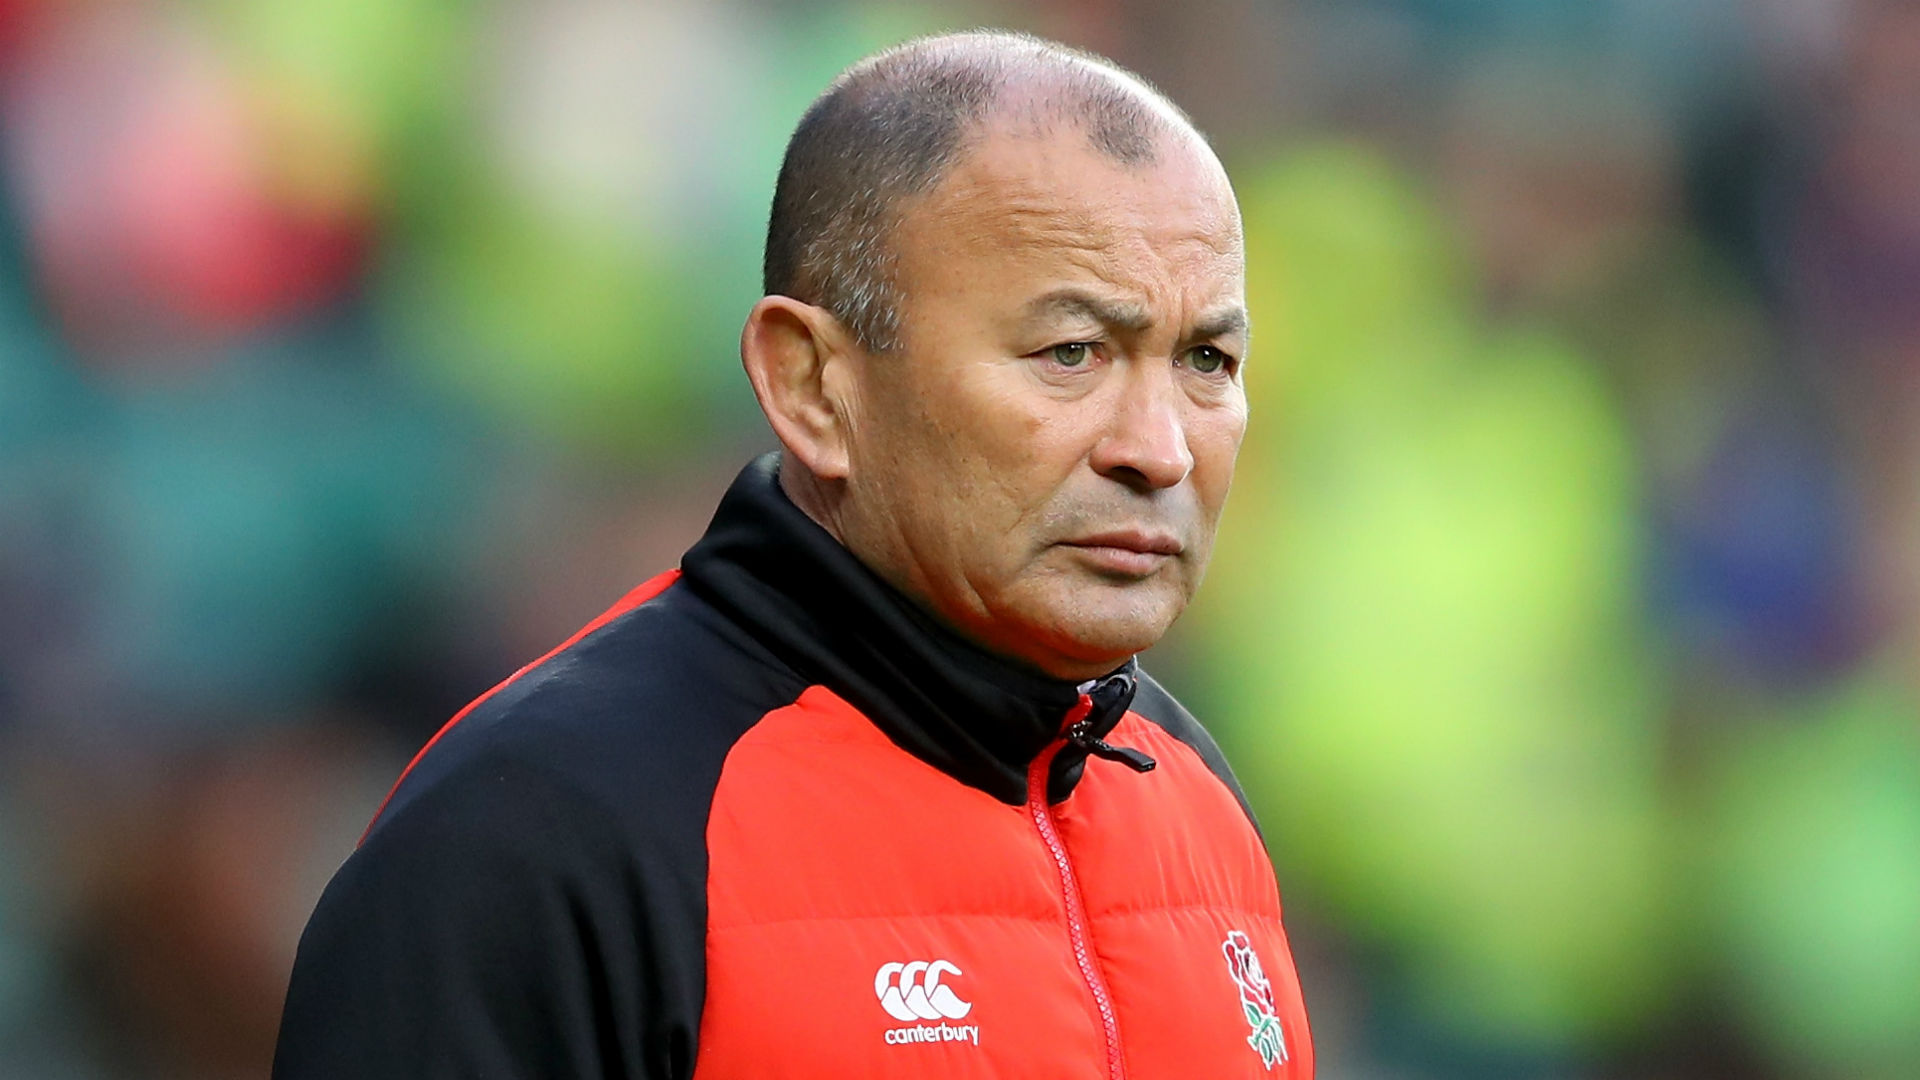 Eddie Jones was reportedly subjected to physical and verbal abuse on a train journey and has vowed to avoid public transport from now on.